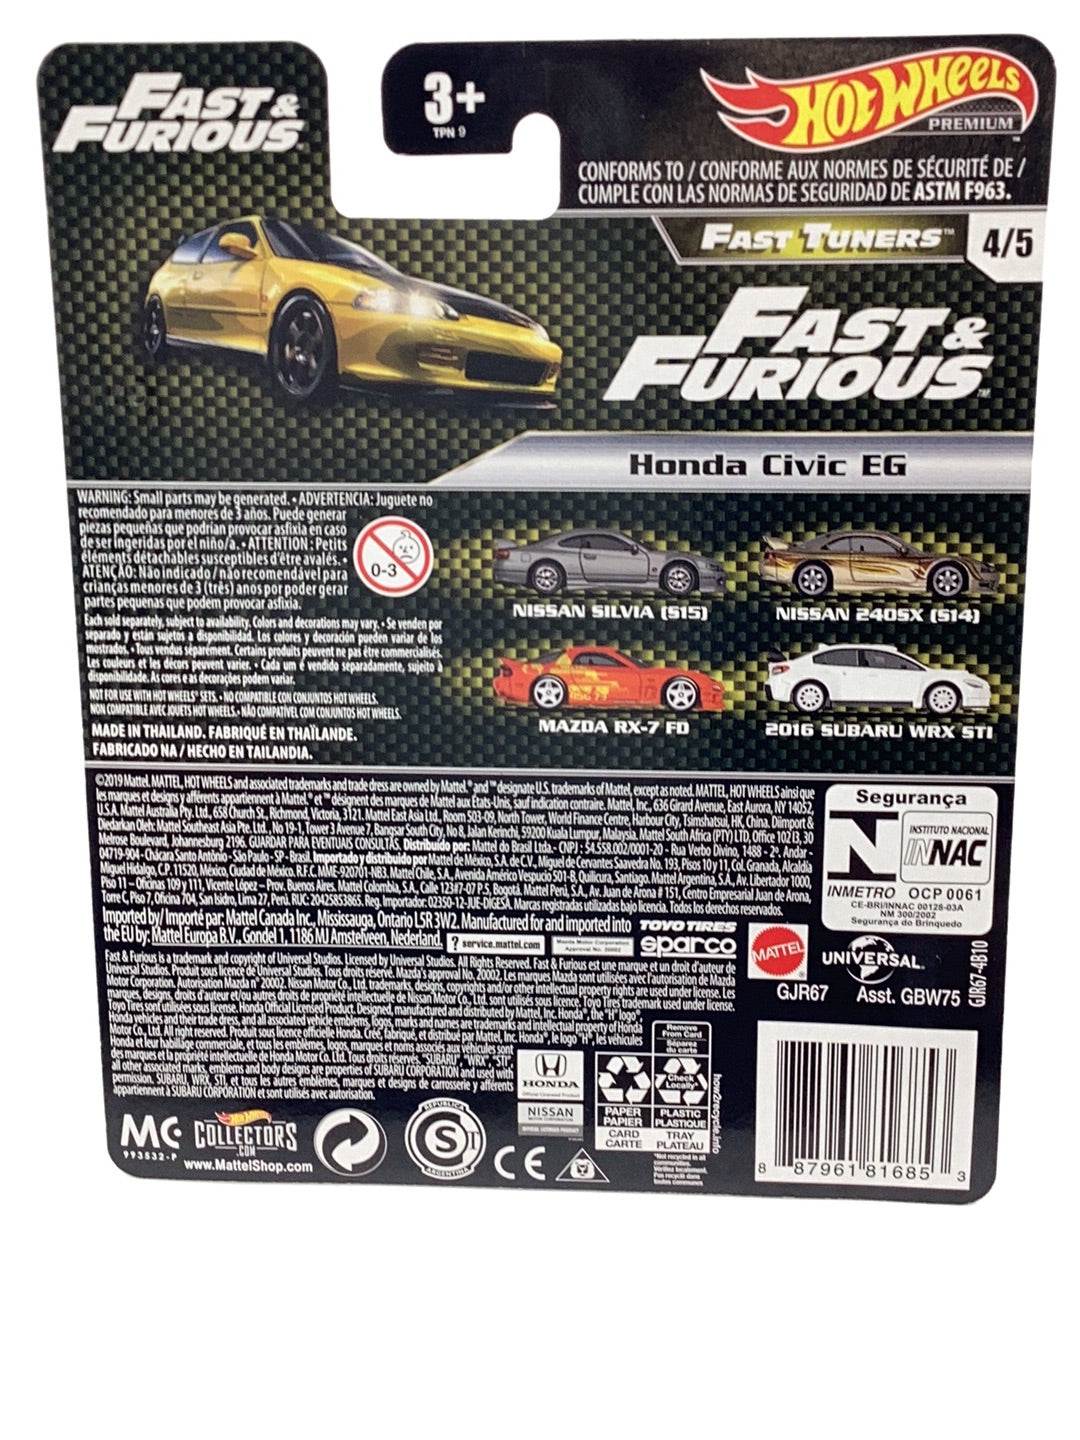 Hot wheels premium fast and furious Fast Tuners 4/5 Honda Civic EG with protector